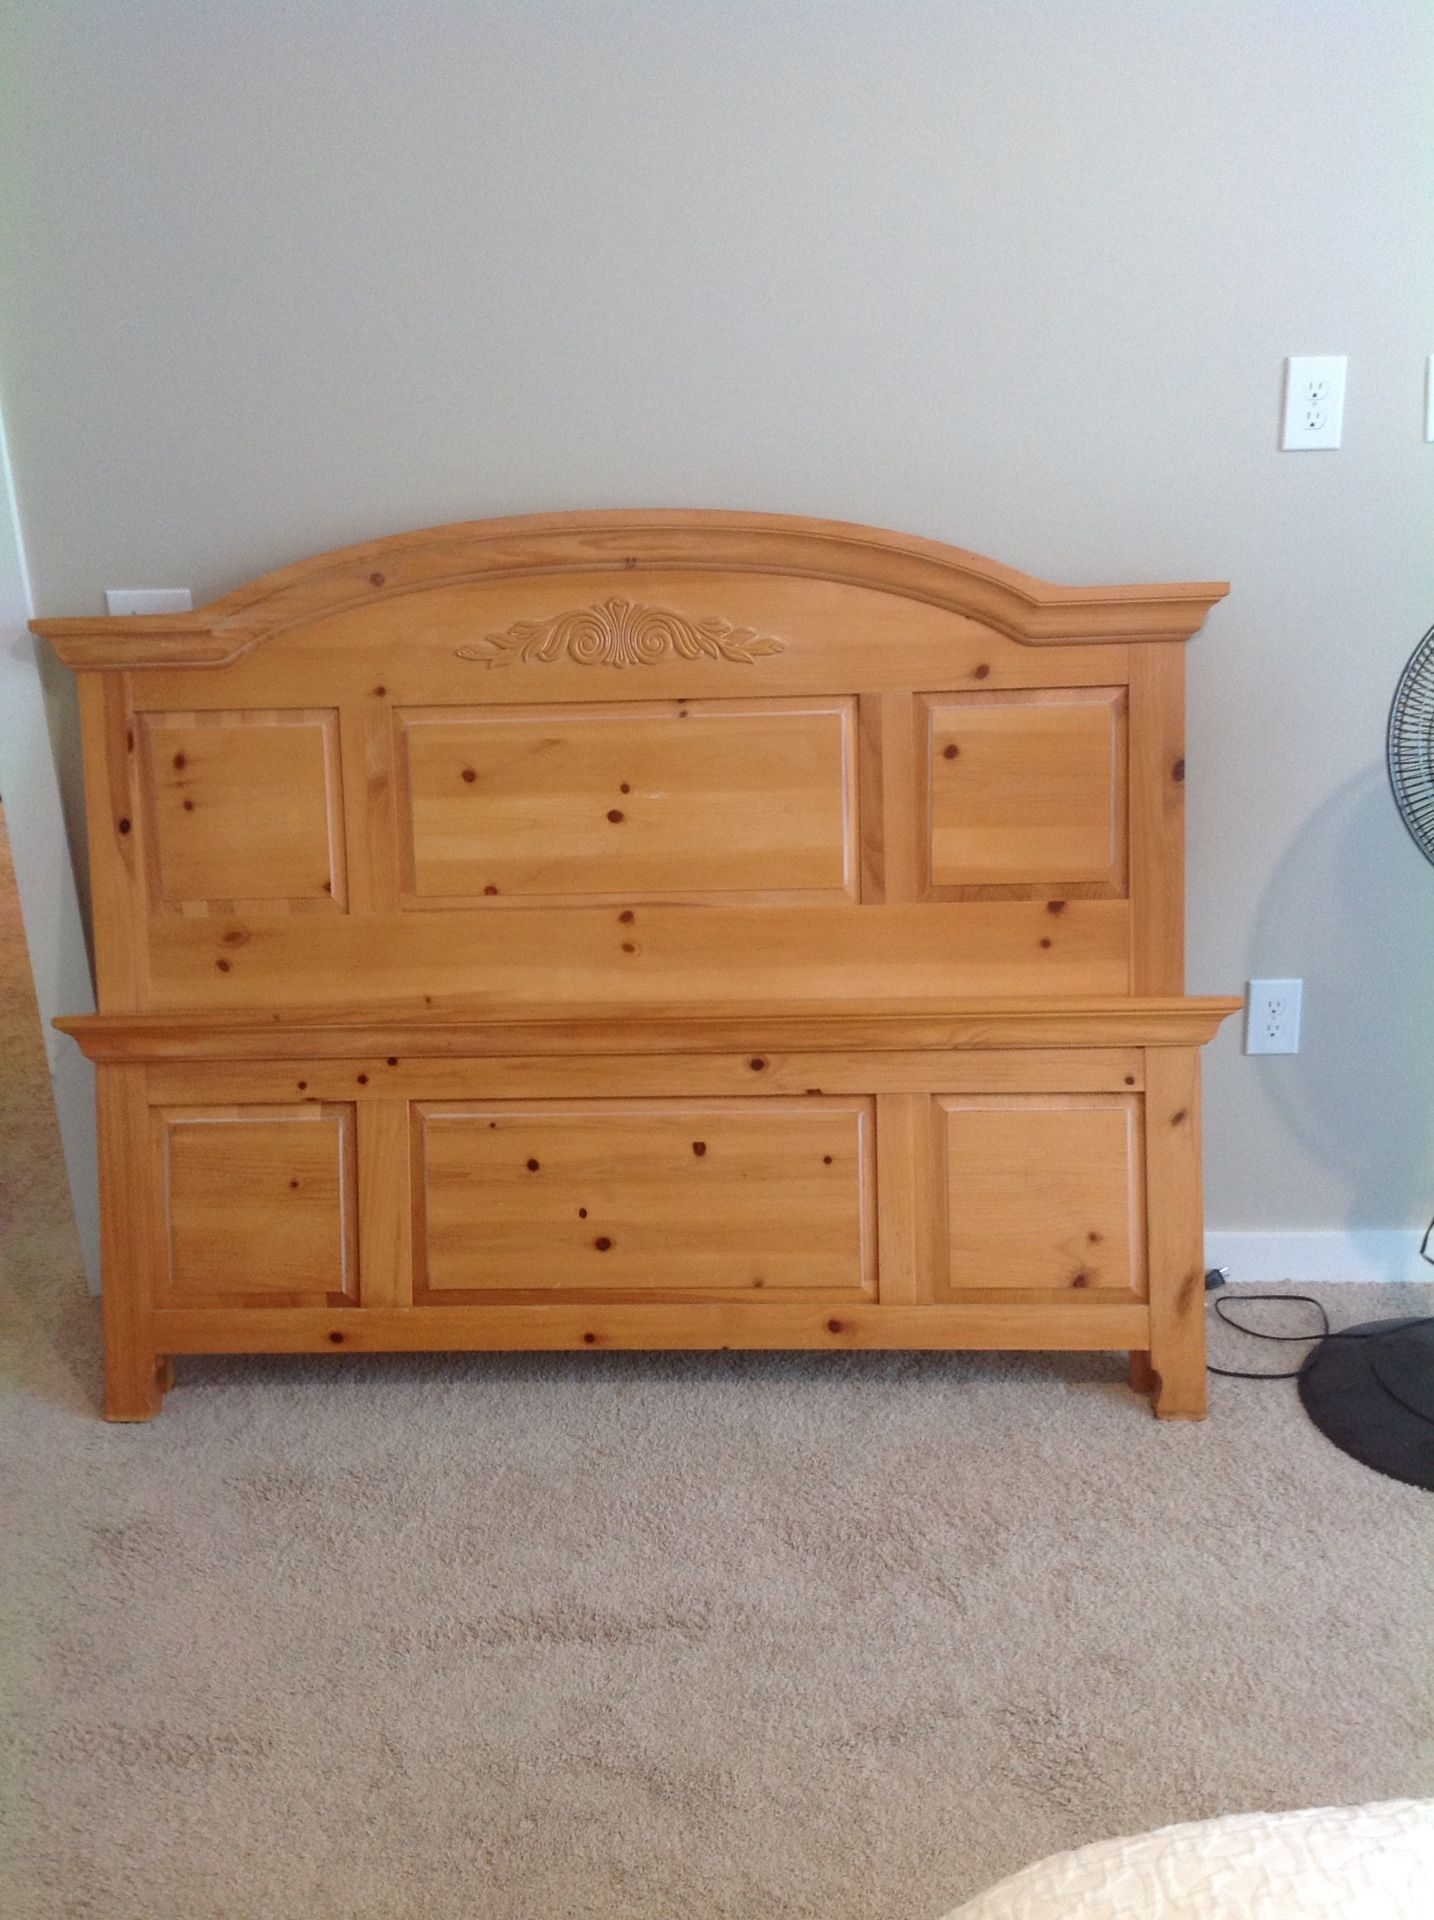 Fontana by Broyhill solid pine 5 piece queen bedroom set - like new condition